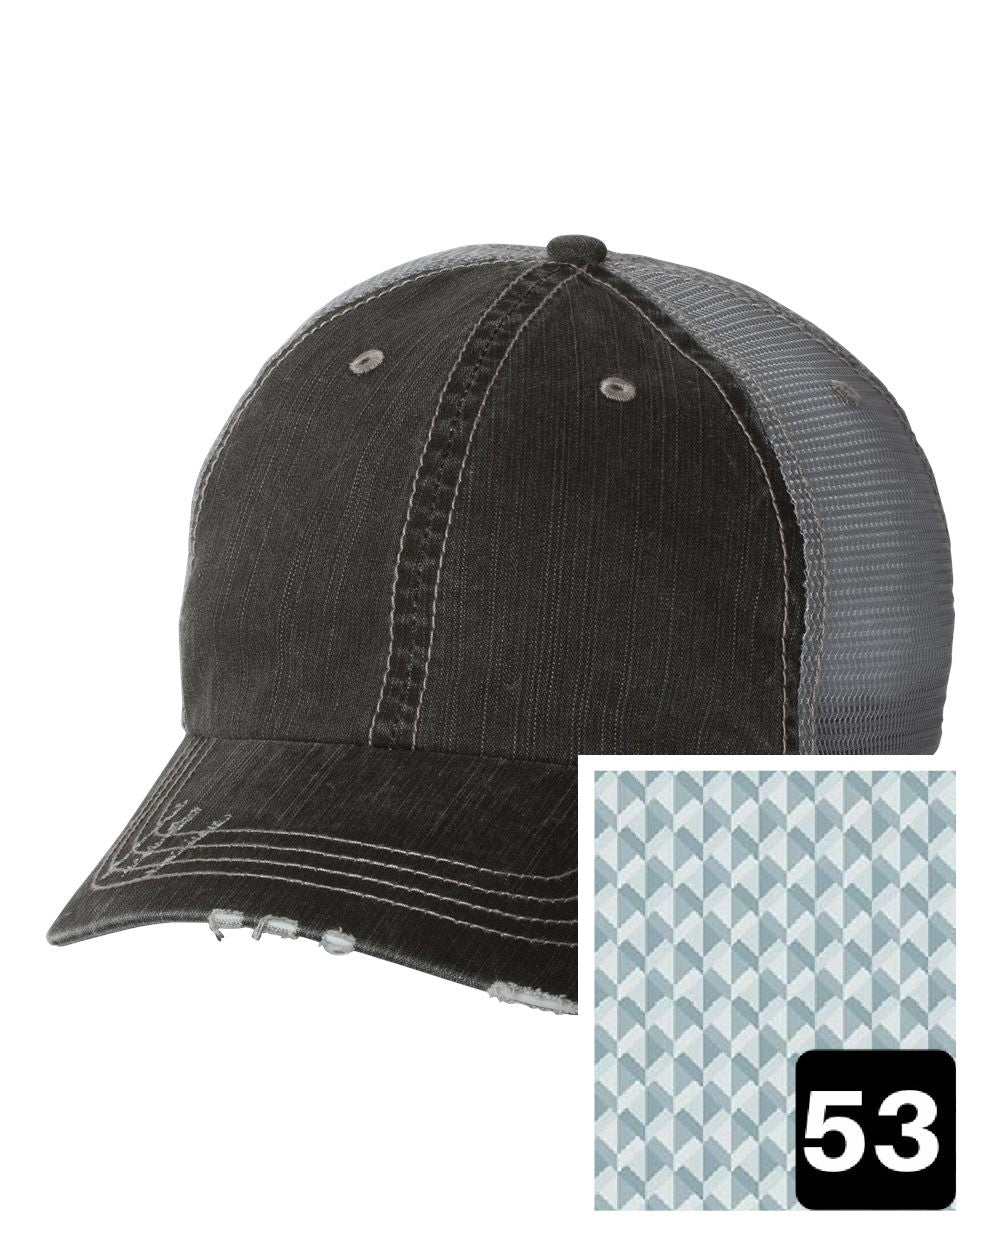 gray distressed trucker hat with multi-color stripe fabric state of New York